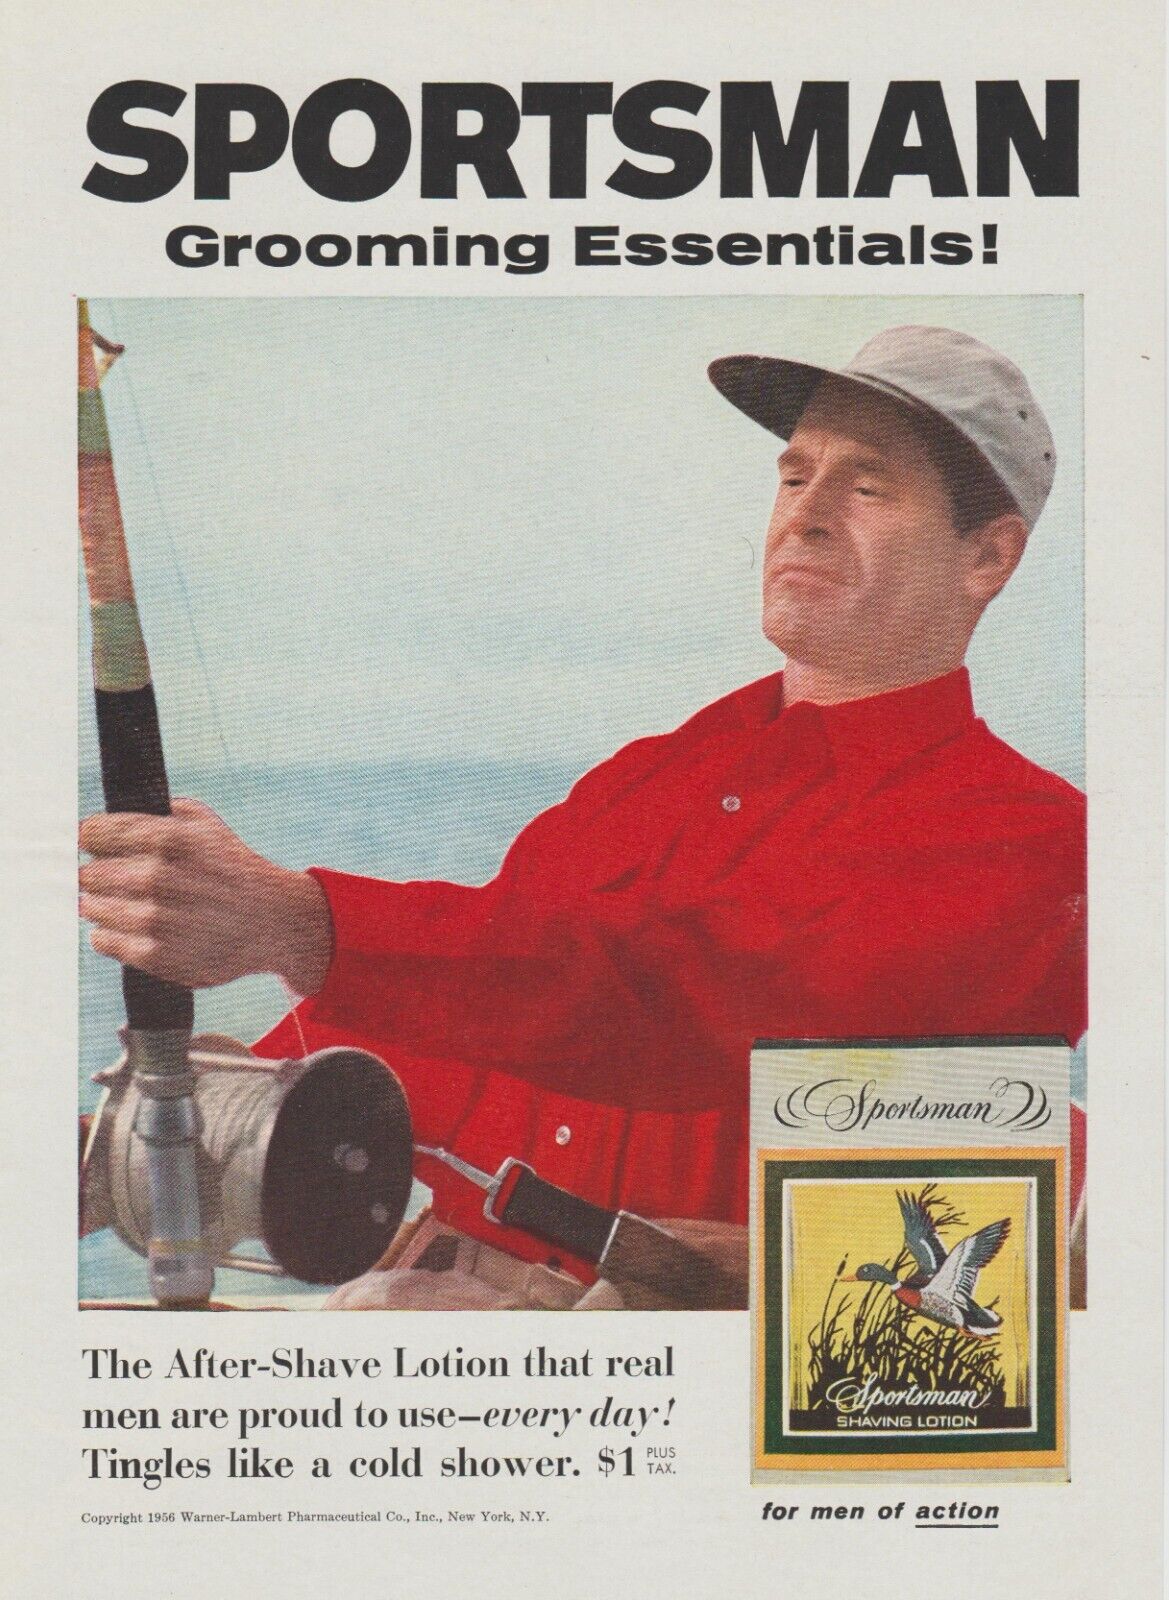 1956 Sportsman After Shave Lotion - Real Men Proud - Fisherman - Print Ad Photo